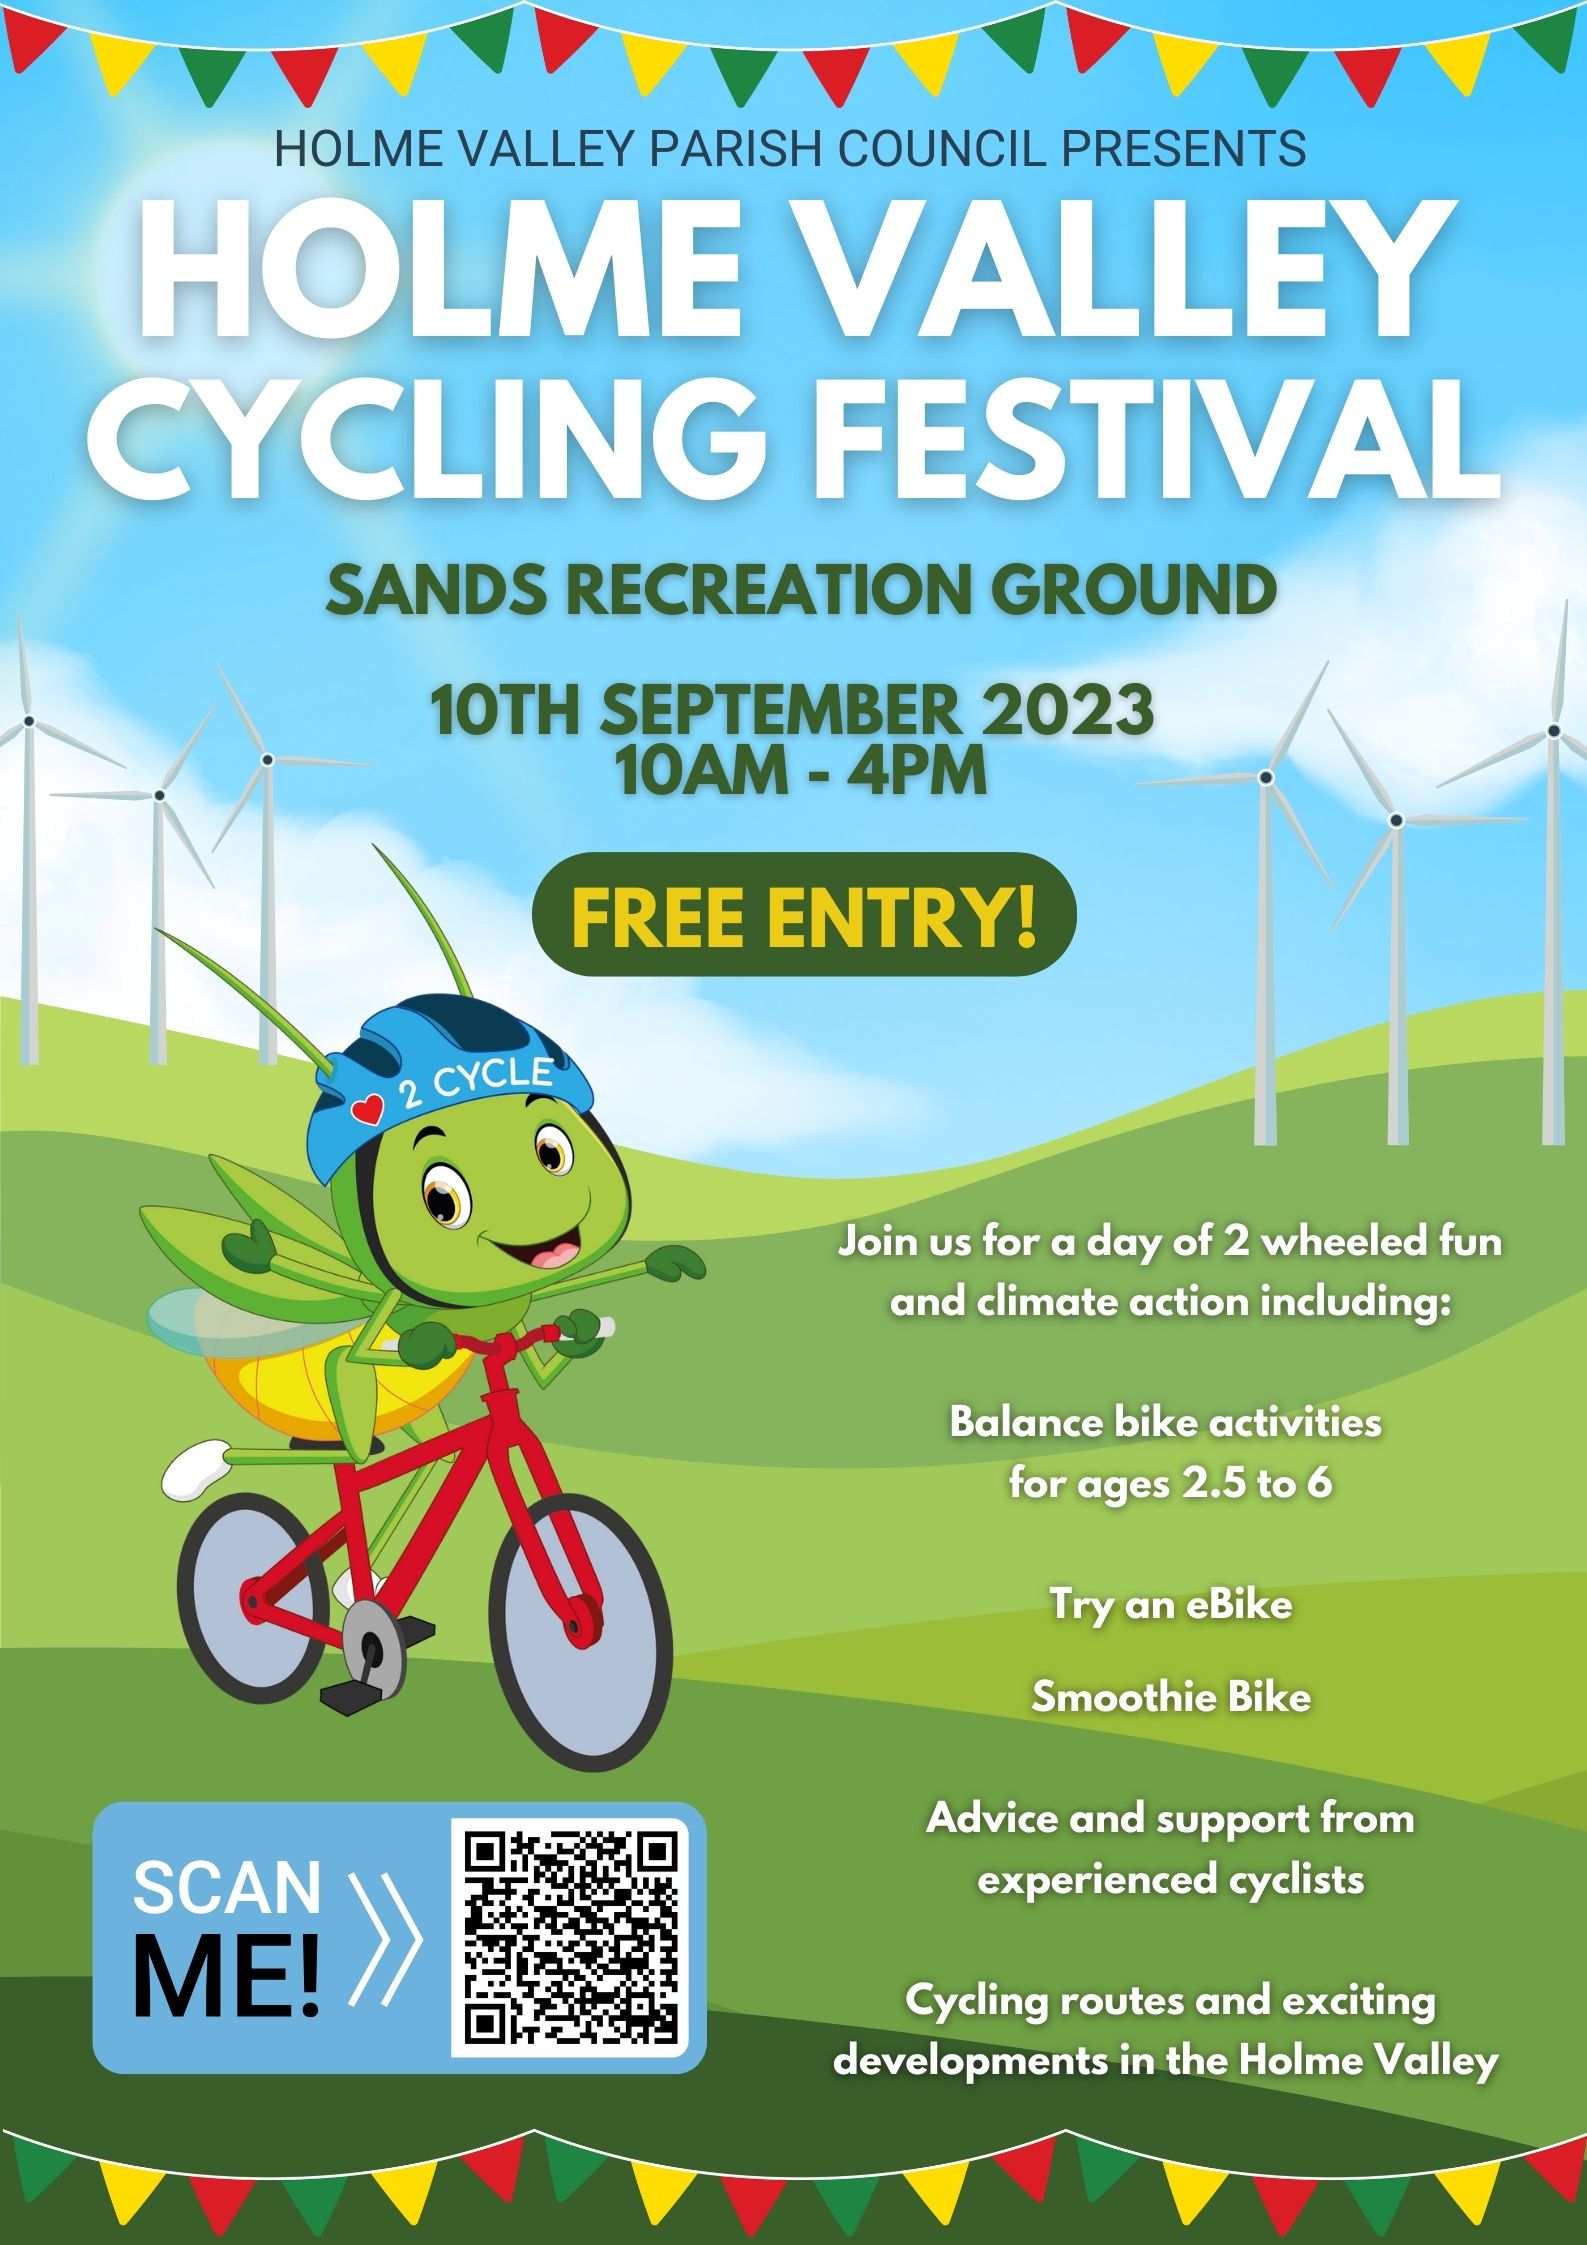 Holme Valley Cycling Festival - Save the Date!